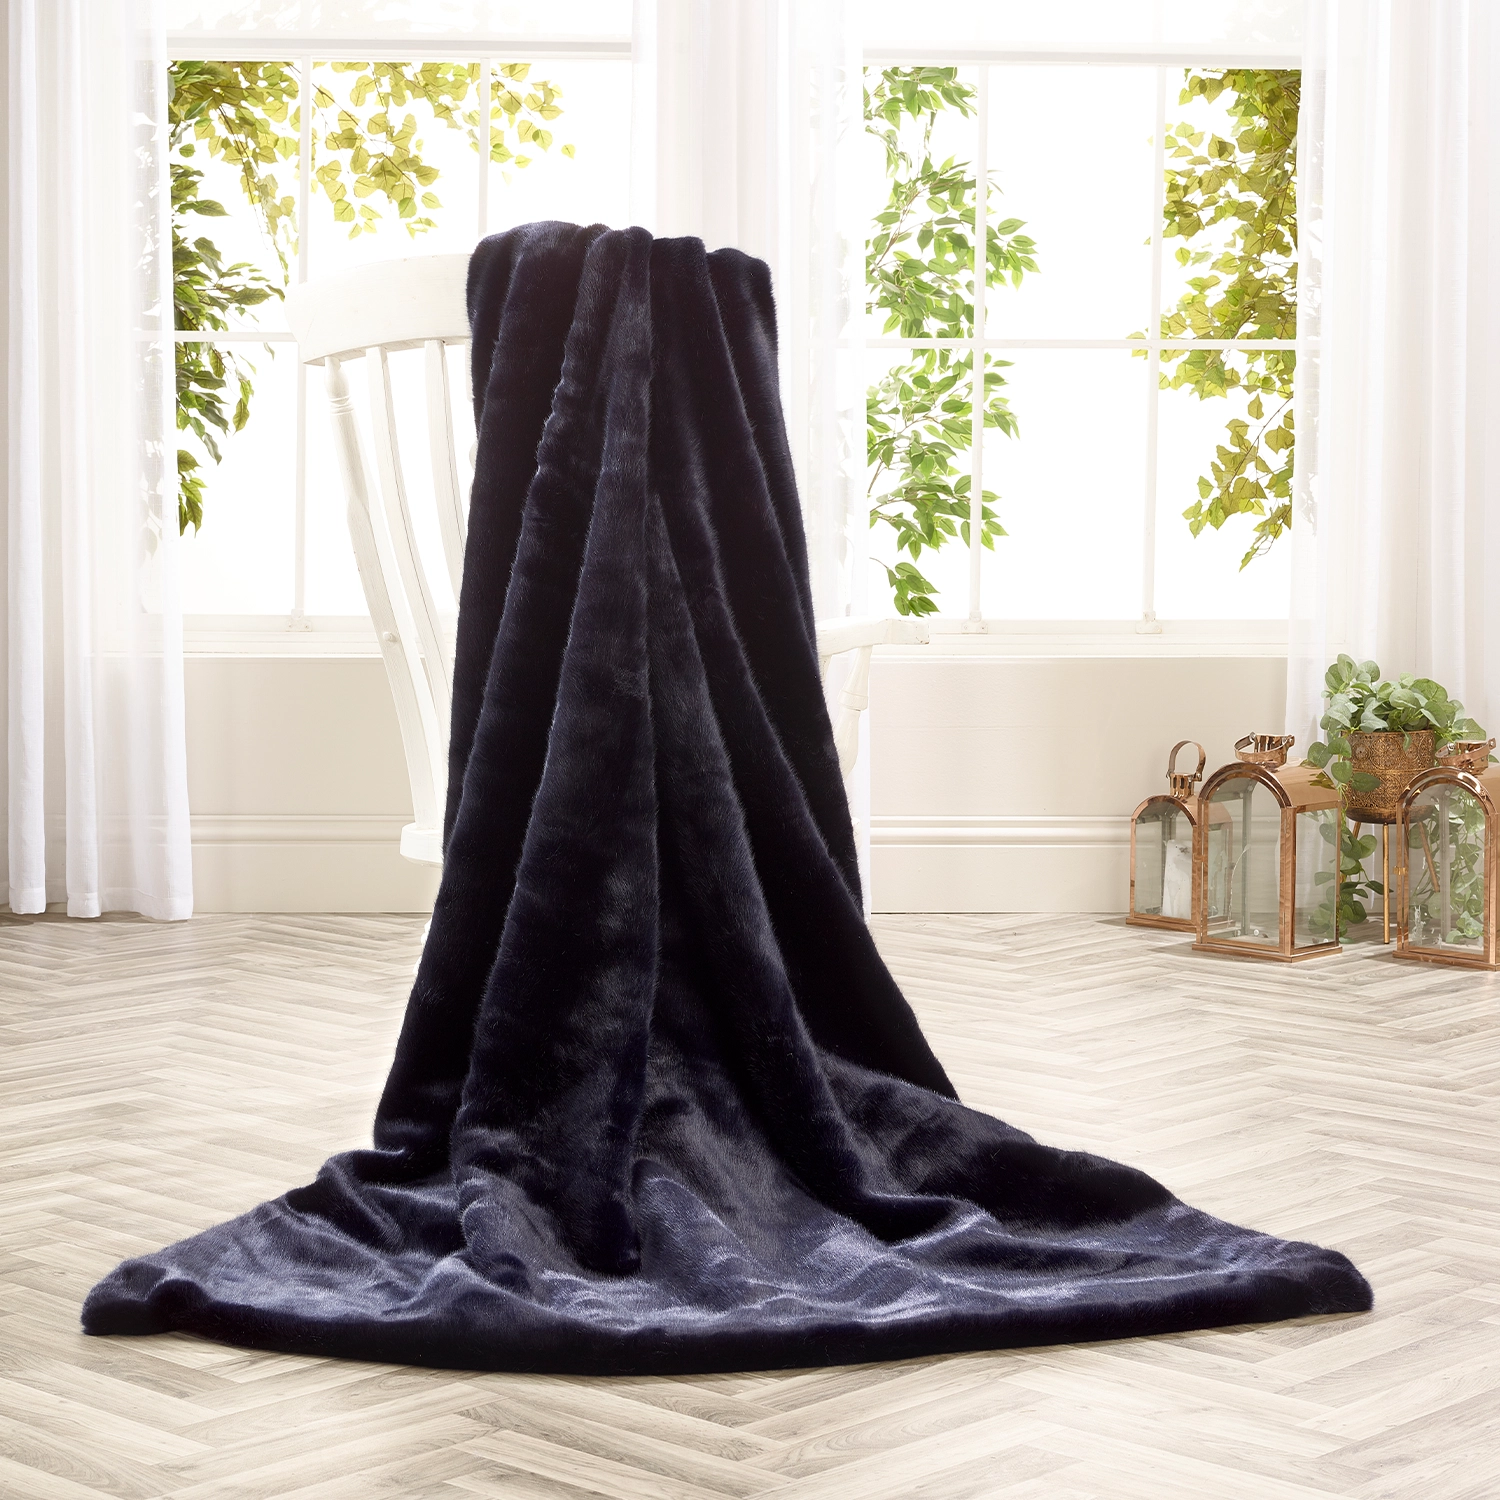 London Navy Faux Fur Throws and Bedspreads